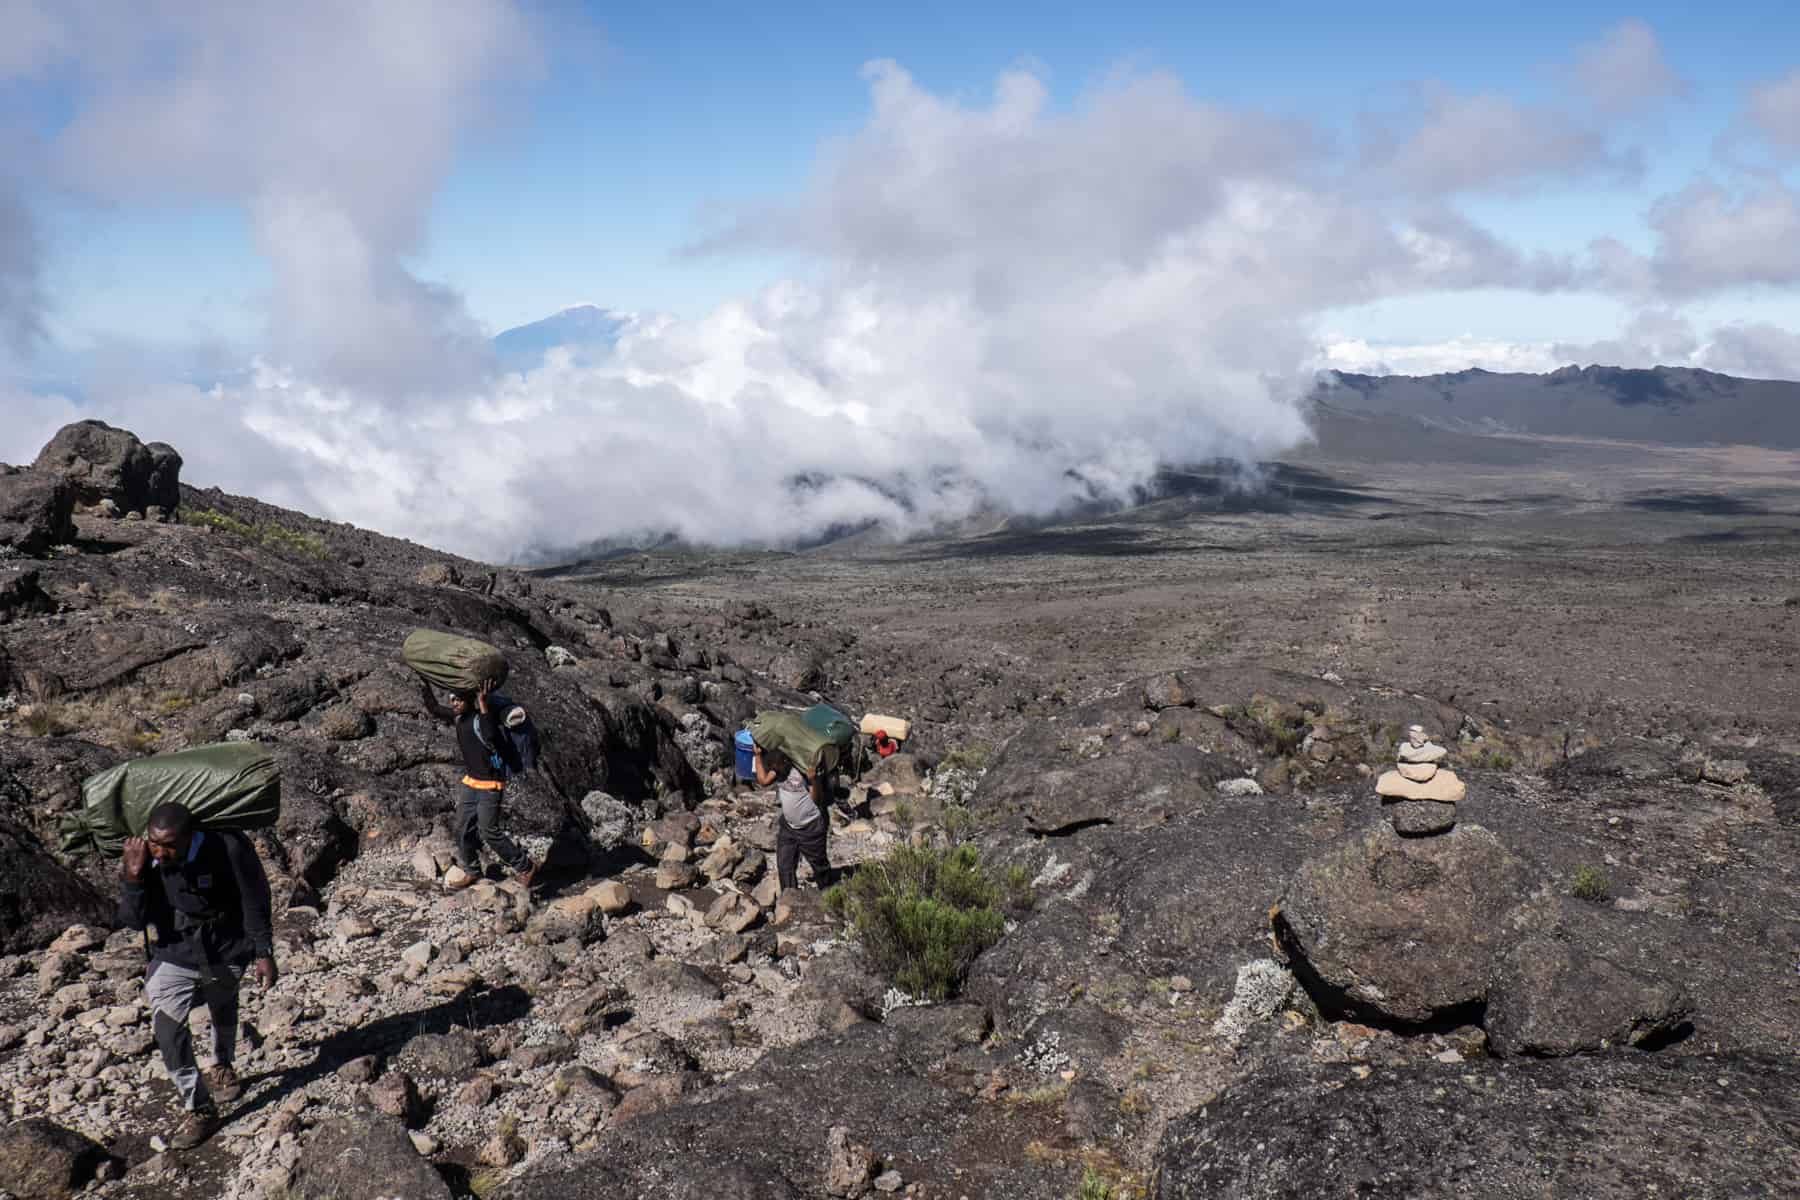 Porters carrying large green sacks walk over the rocky Shira Cathedral ridge with a view over the dry green area of the Kilimanjaro Shira 2 Camp